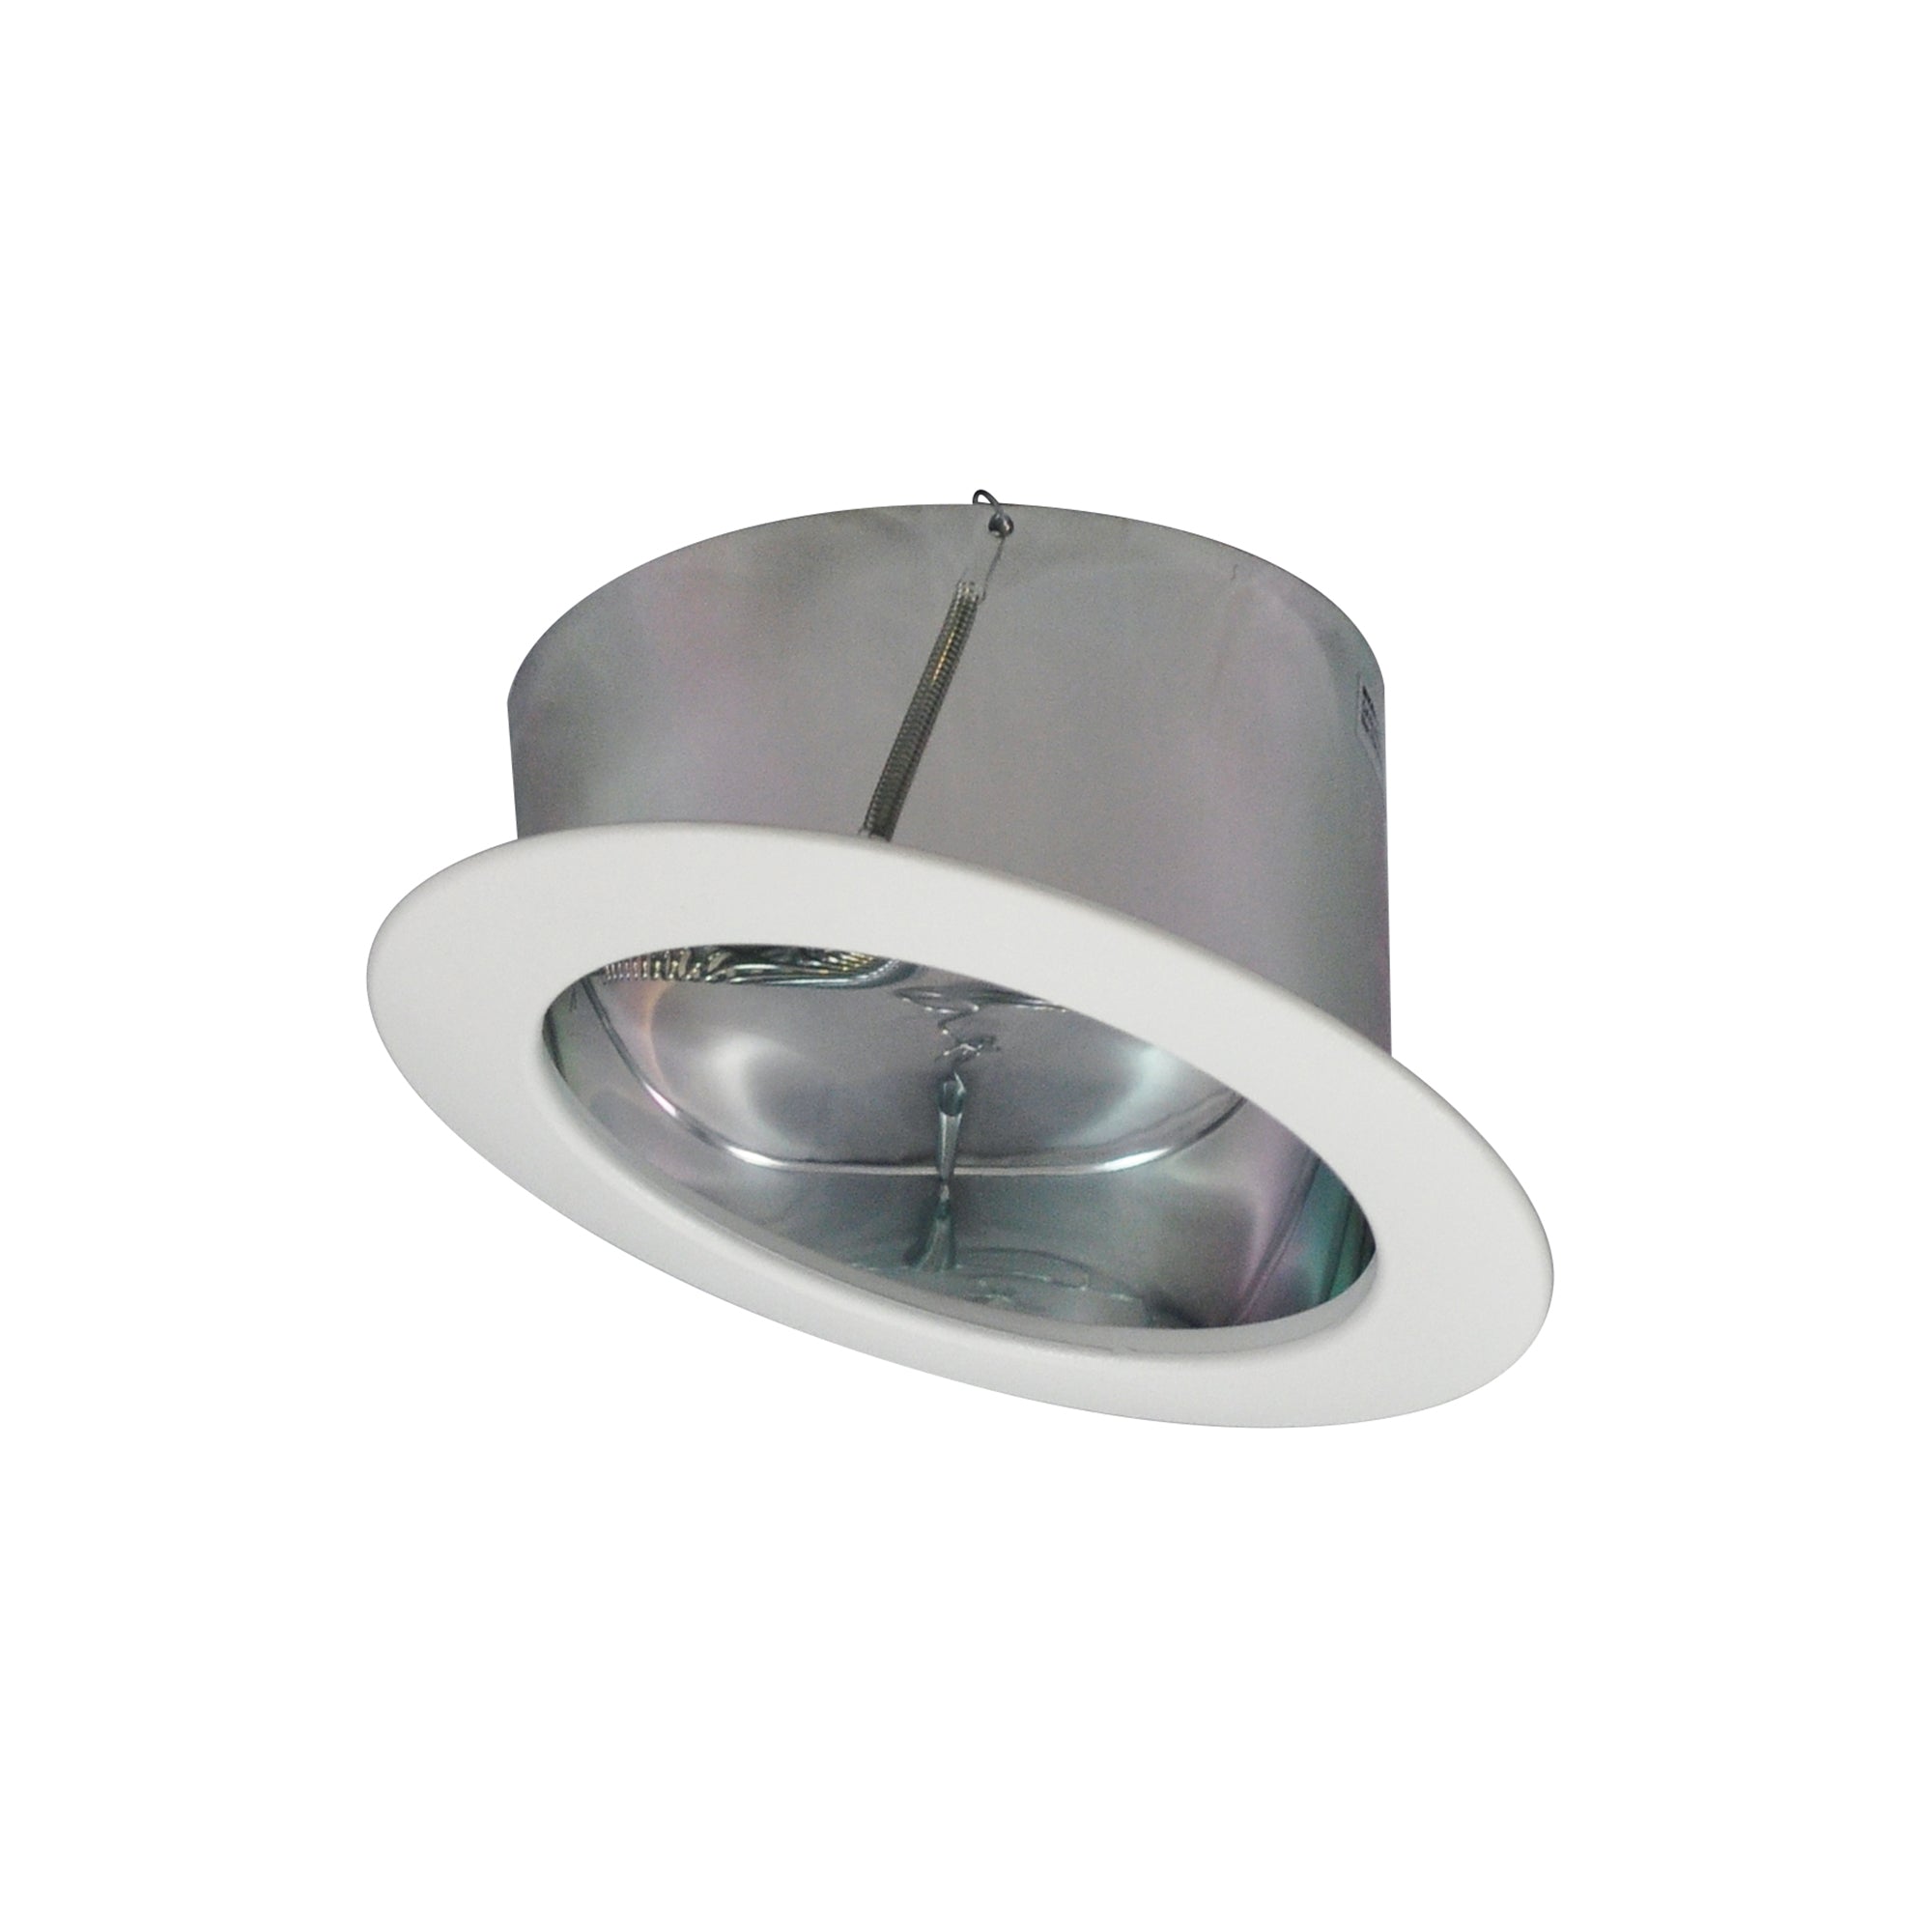 Nora Lighting NTS-615C - Recessed - 6 Inch Sloped Metal Reflector Trim, Chrome/White